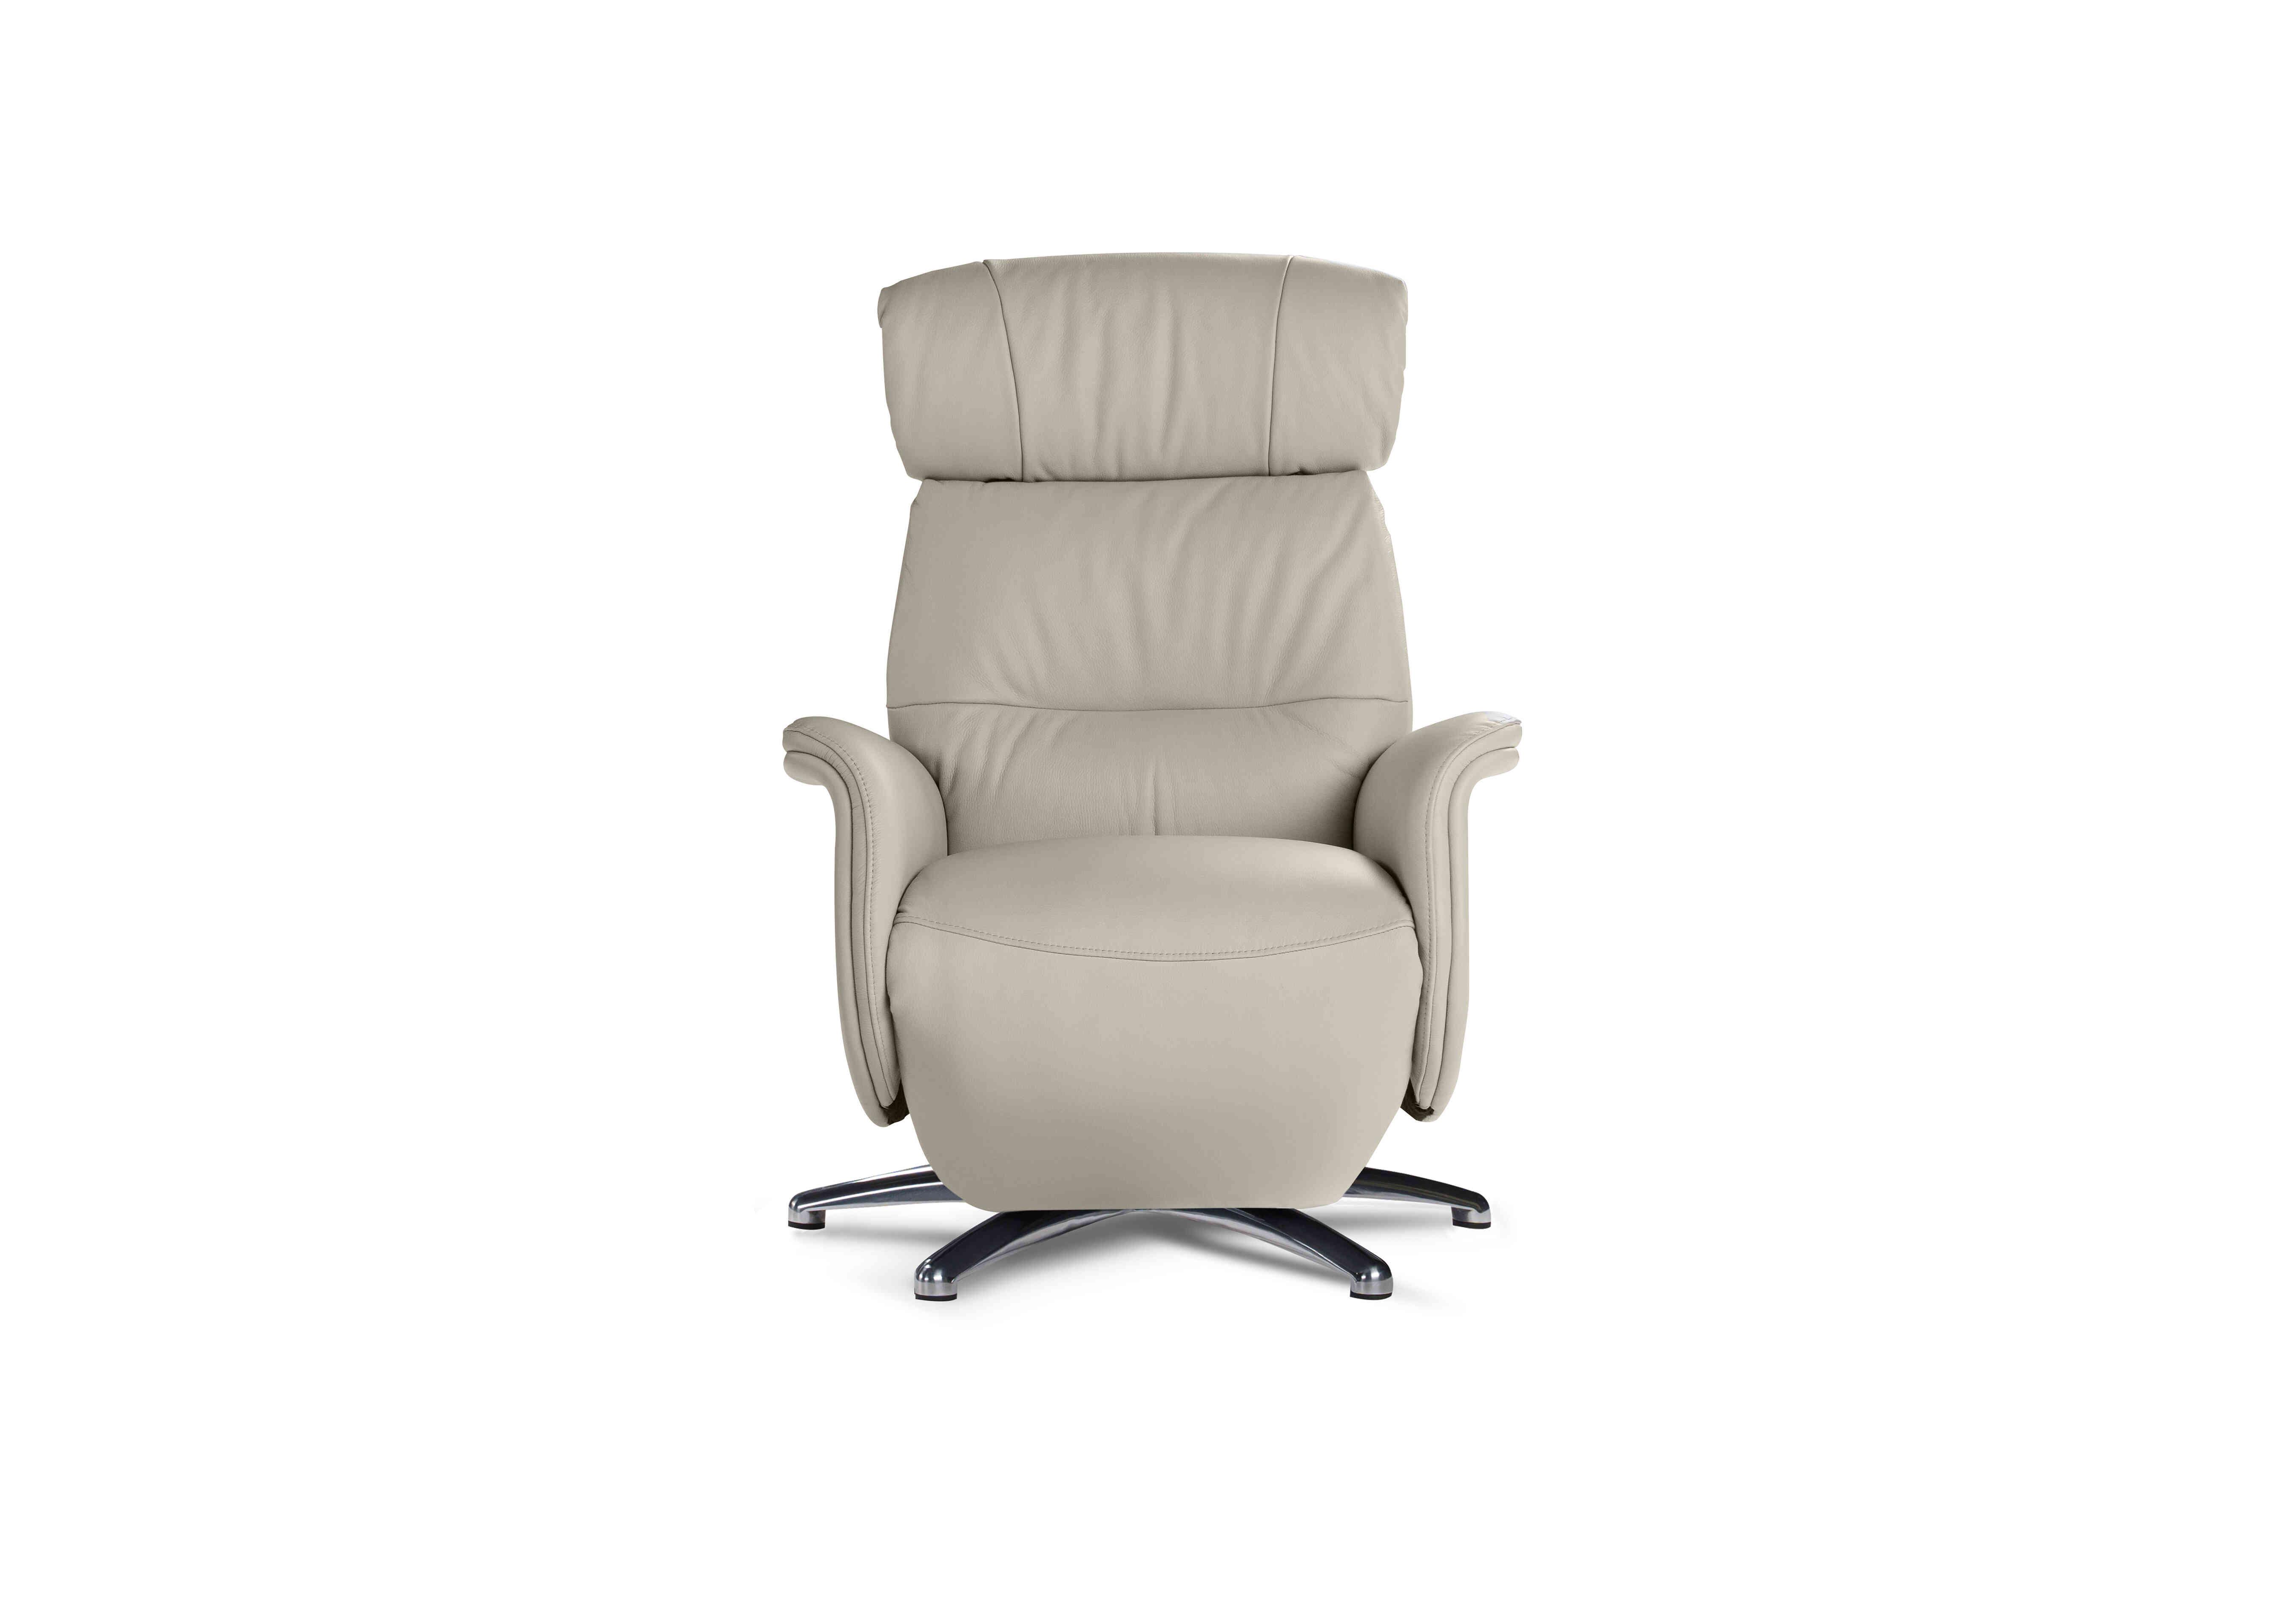 Tricolour Vincenzo Leather Swivel Power Recliner Chair in Torello 371 Ice Sa Ft on Furniture Village